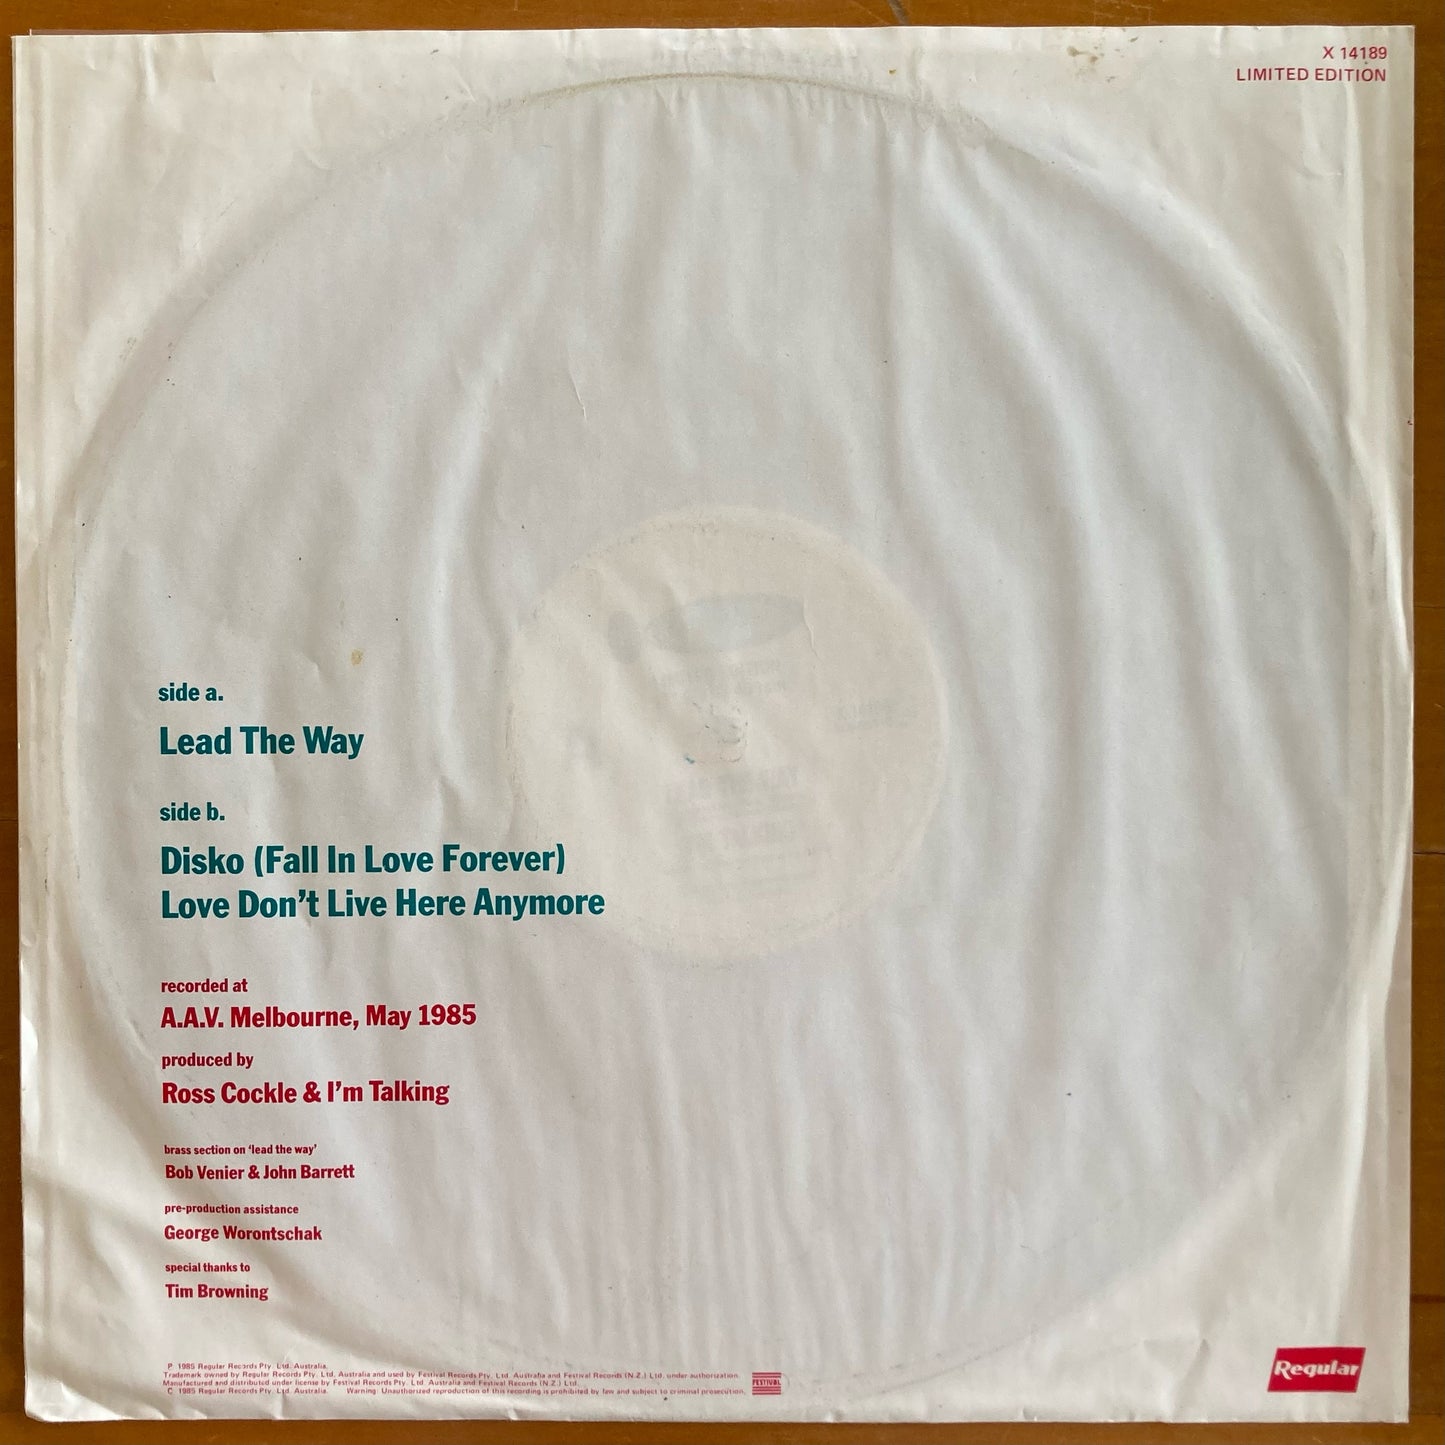 I'm Talking - Love Don't Live Here Anymore (12" single)